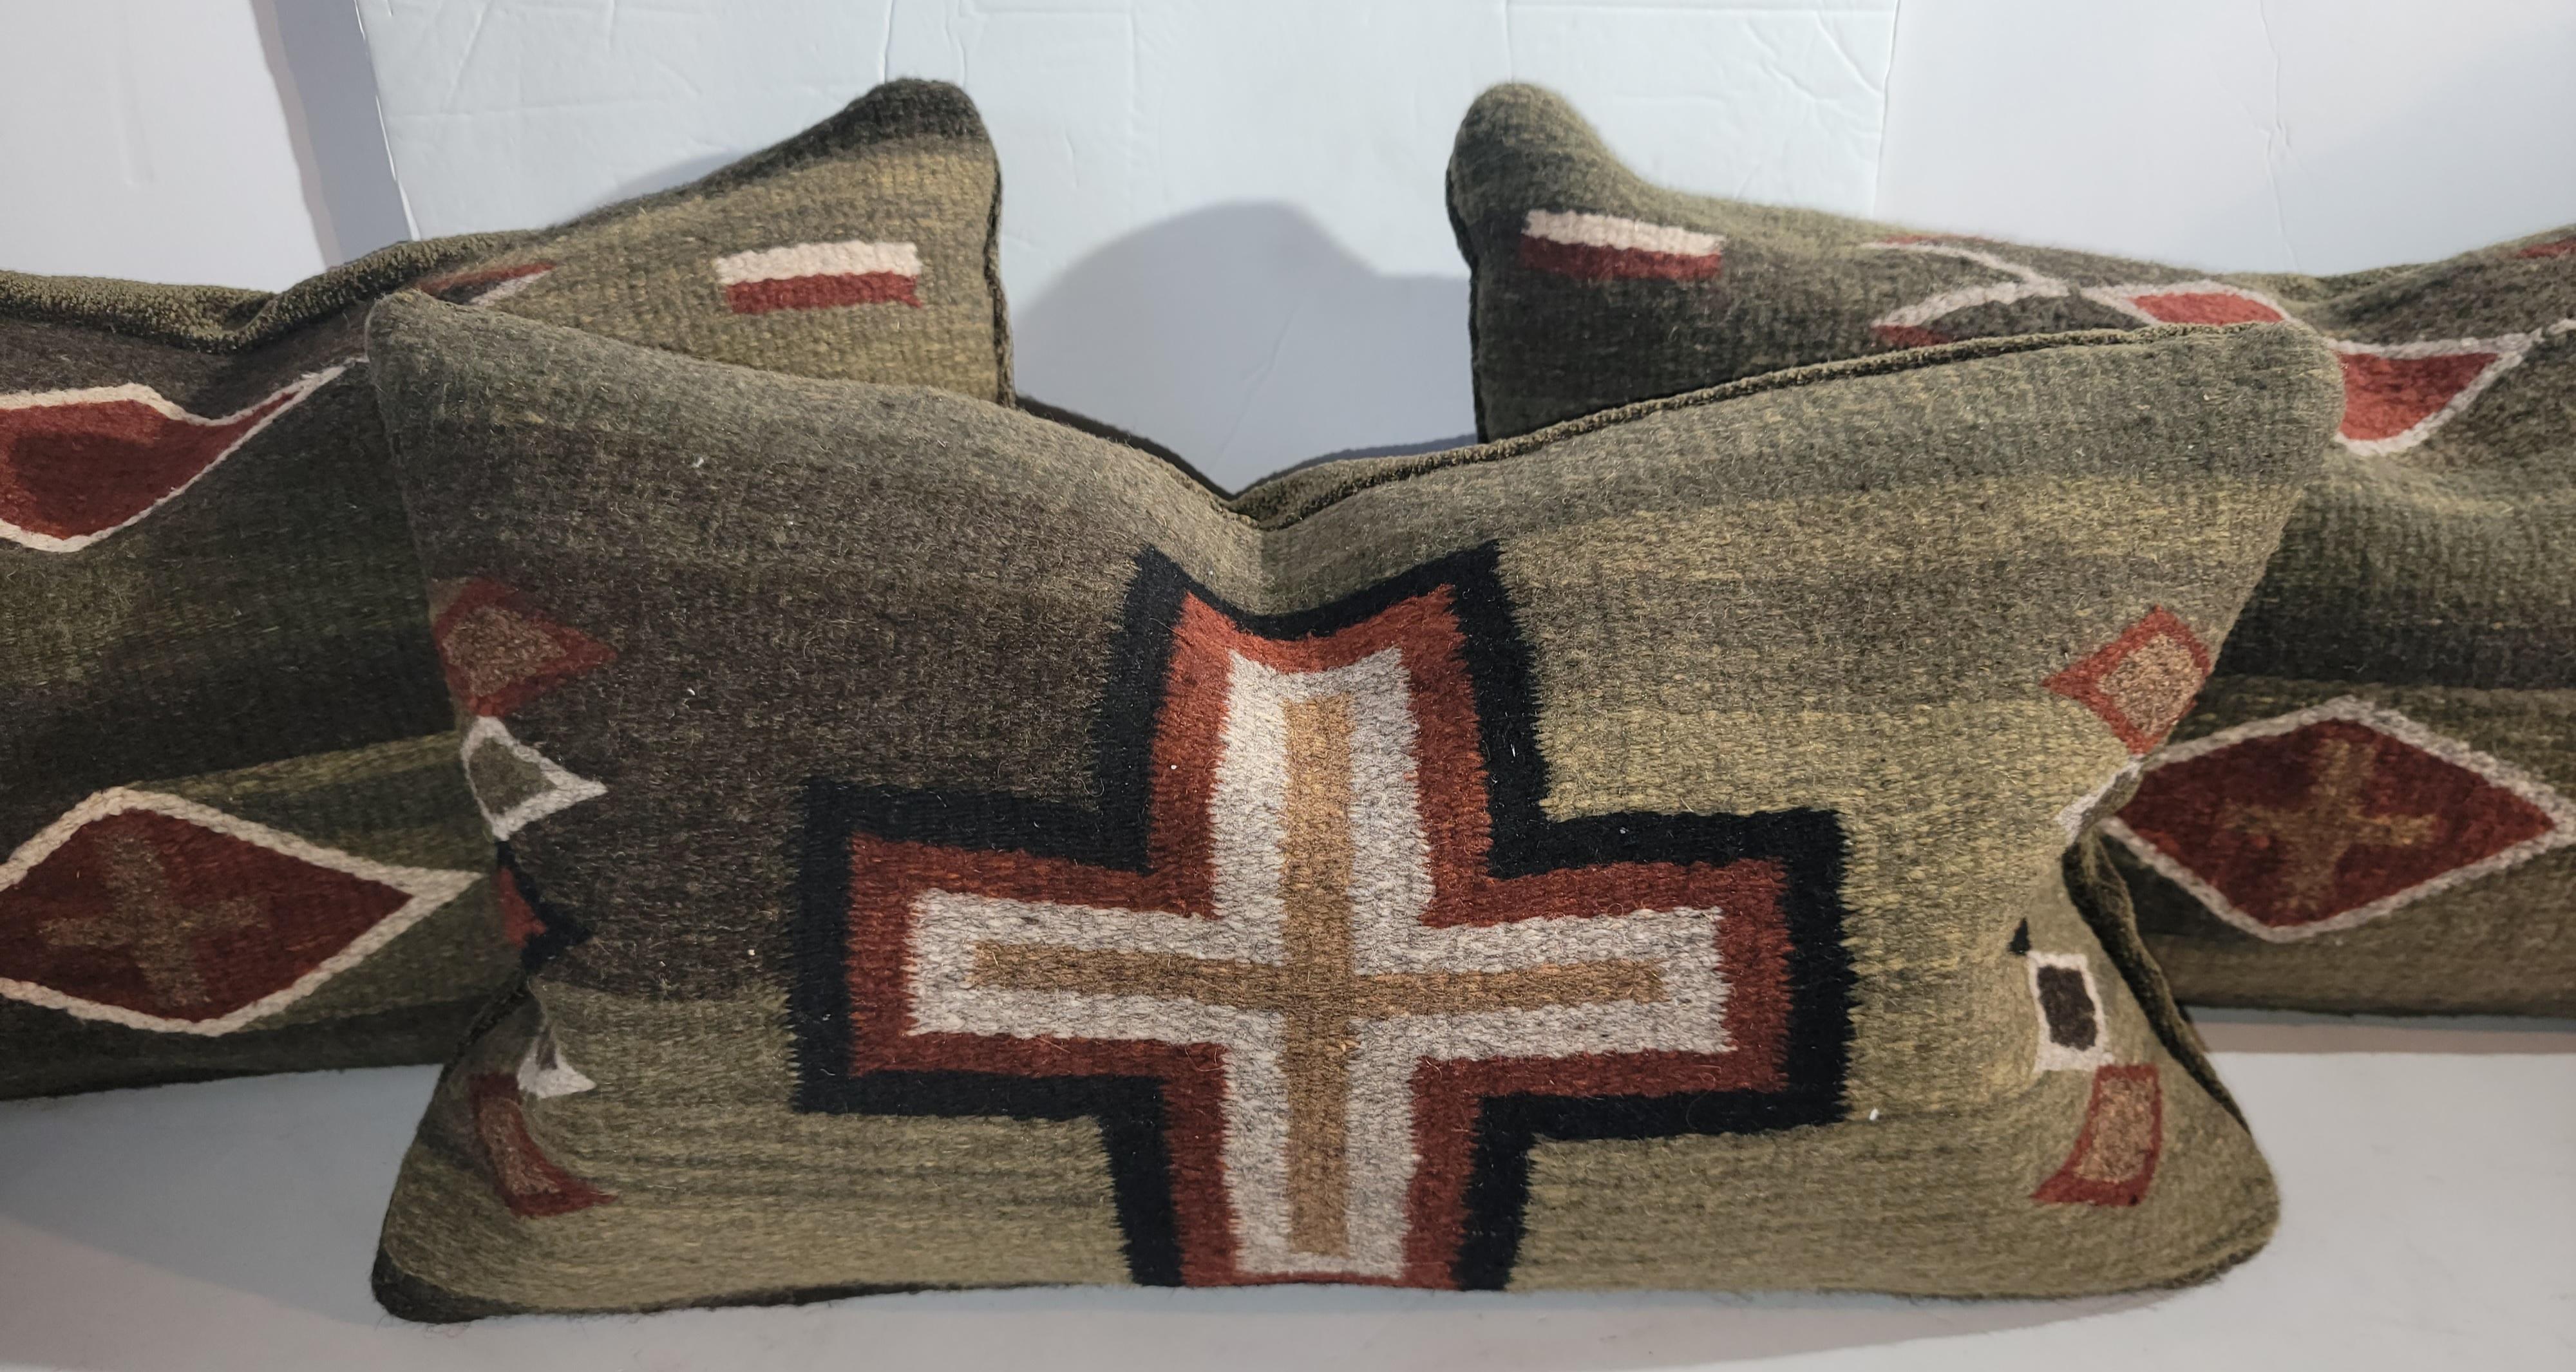 Pair of Mexican Indian weaving pillows. Olive, Off White, Greens, Rust colors.
Each pillow measures approx - 22 wide x 12 high
Great used vintage textiles made into pillows.